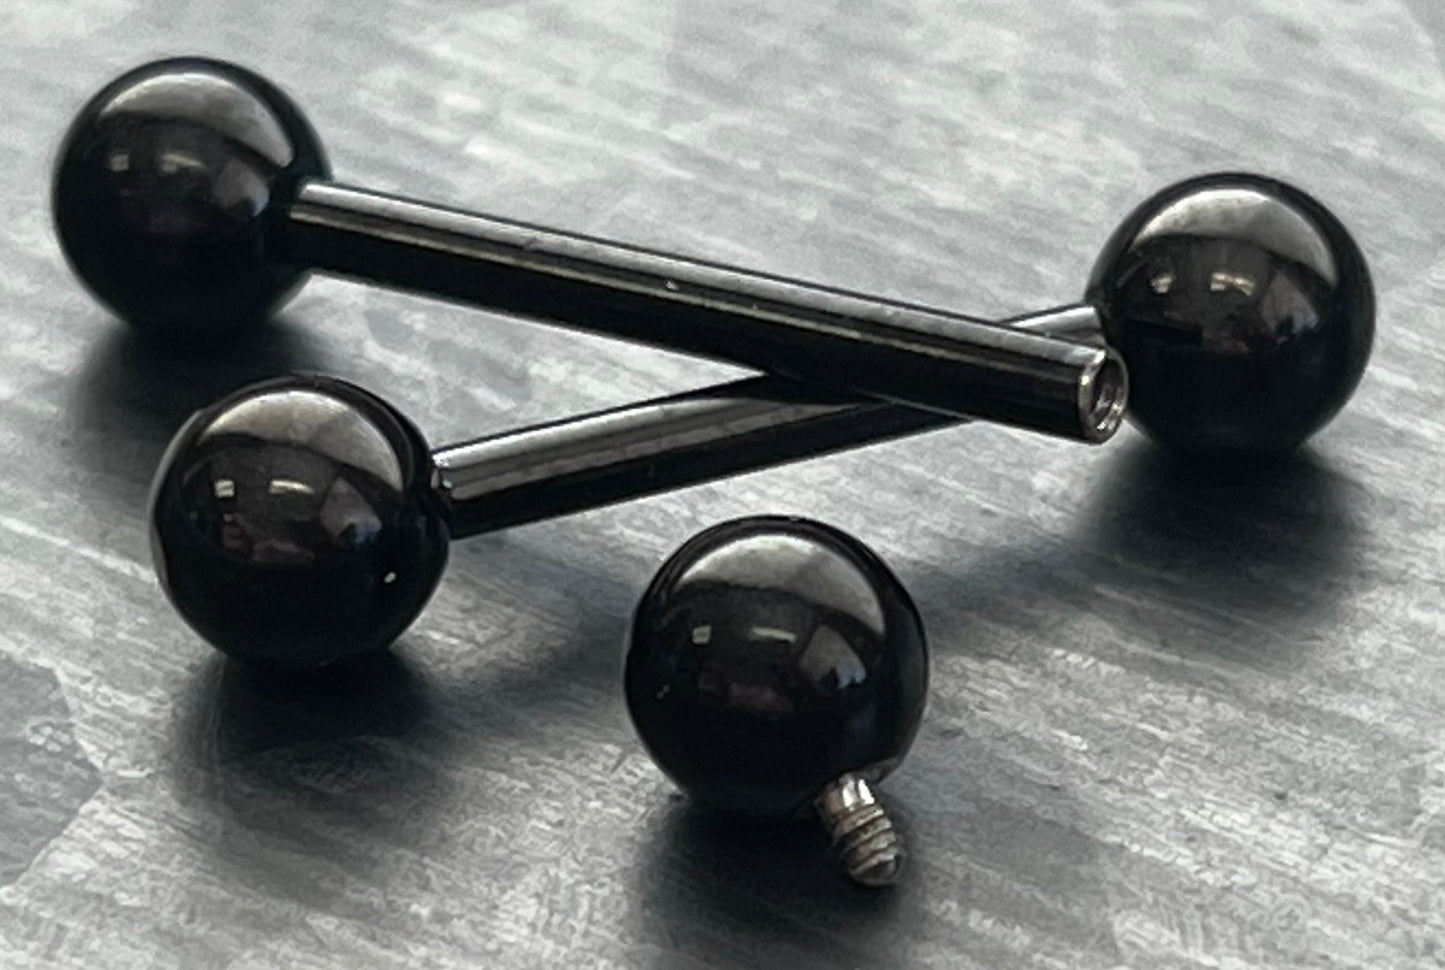 1 Piece of Implant Grade Titanium Internally Threaded Industrial Barbell - Tongue - 14g - Wearable Length 12mm or 16mm, 7 Colors Available!